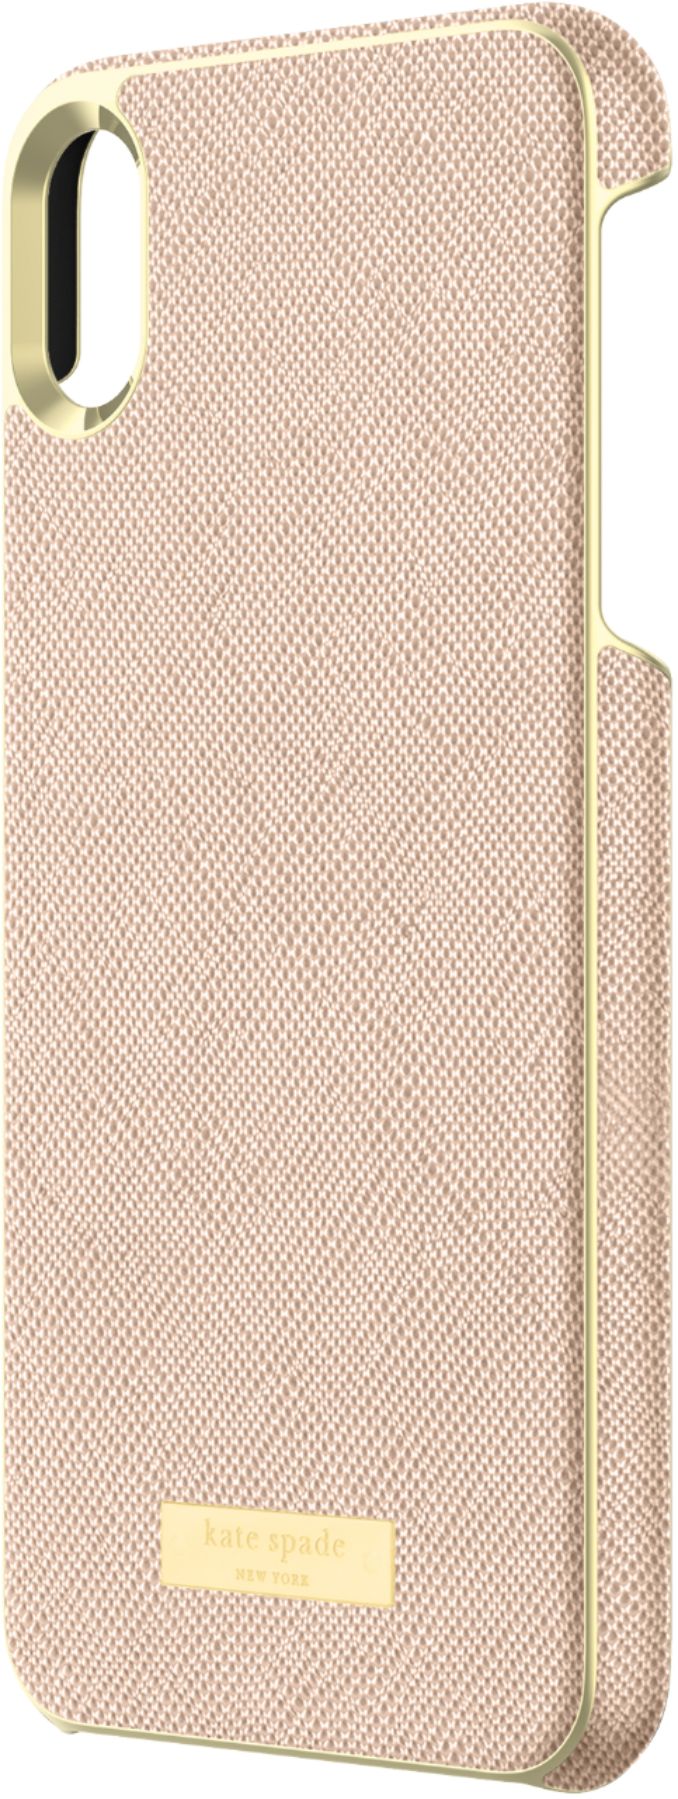 Best Buy: kate spade new york Protective Case for Apple® iPhone® XS Max ...